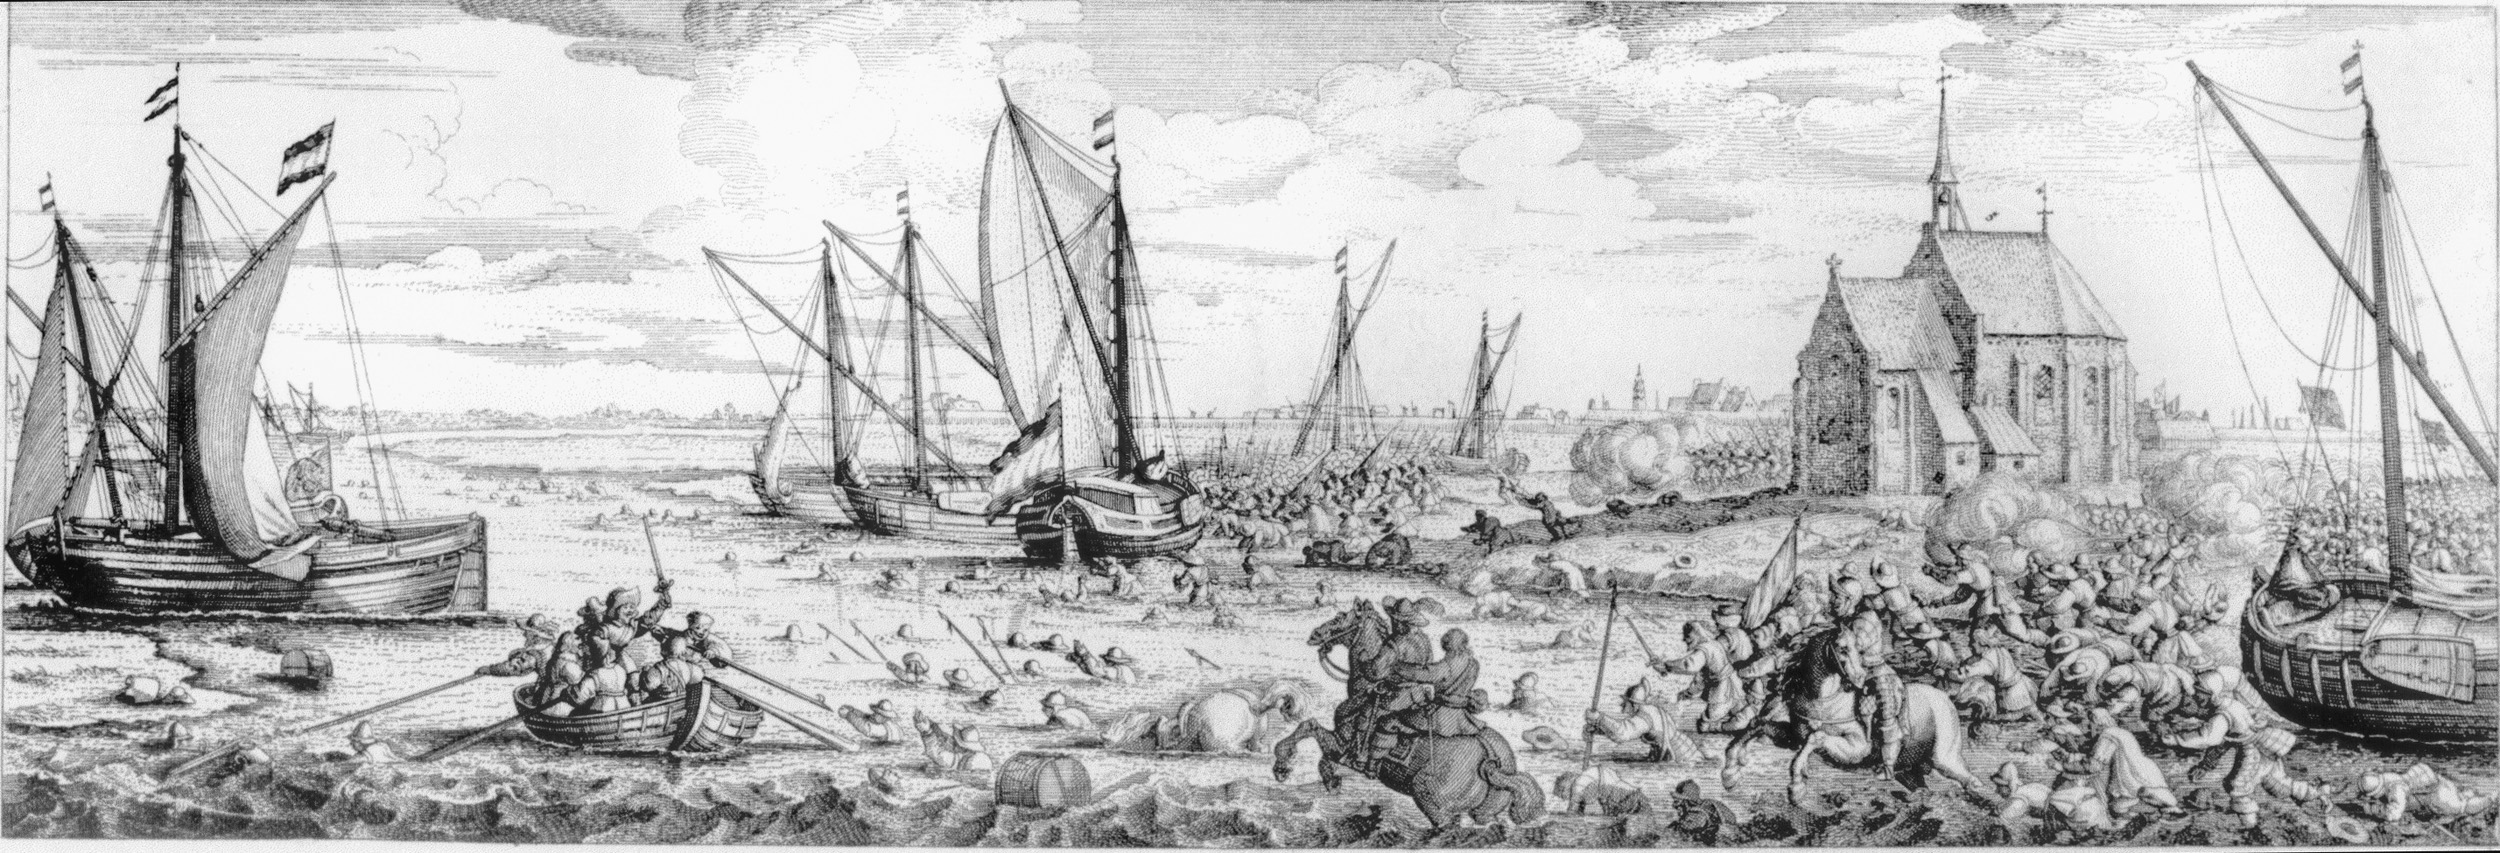 The struggle between Spain and the Dutch lasted for generations, and was fought fiercely both on land and sea.